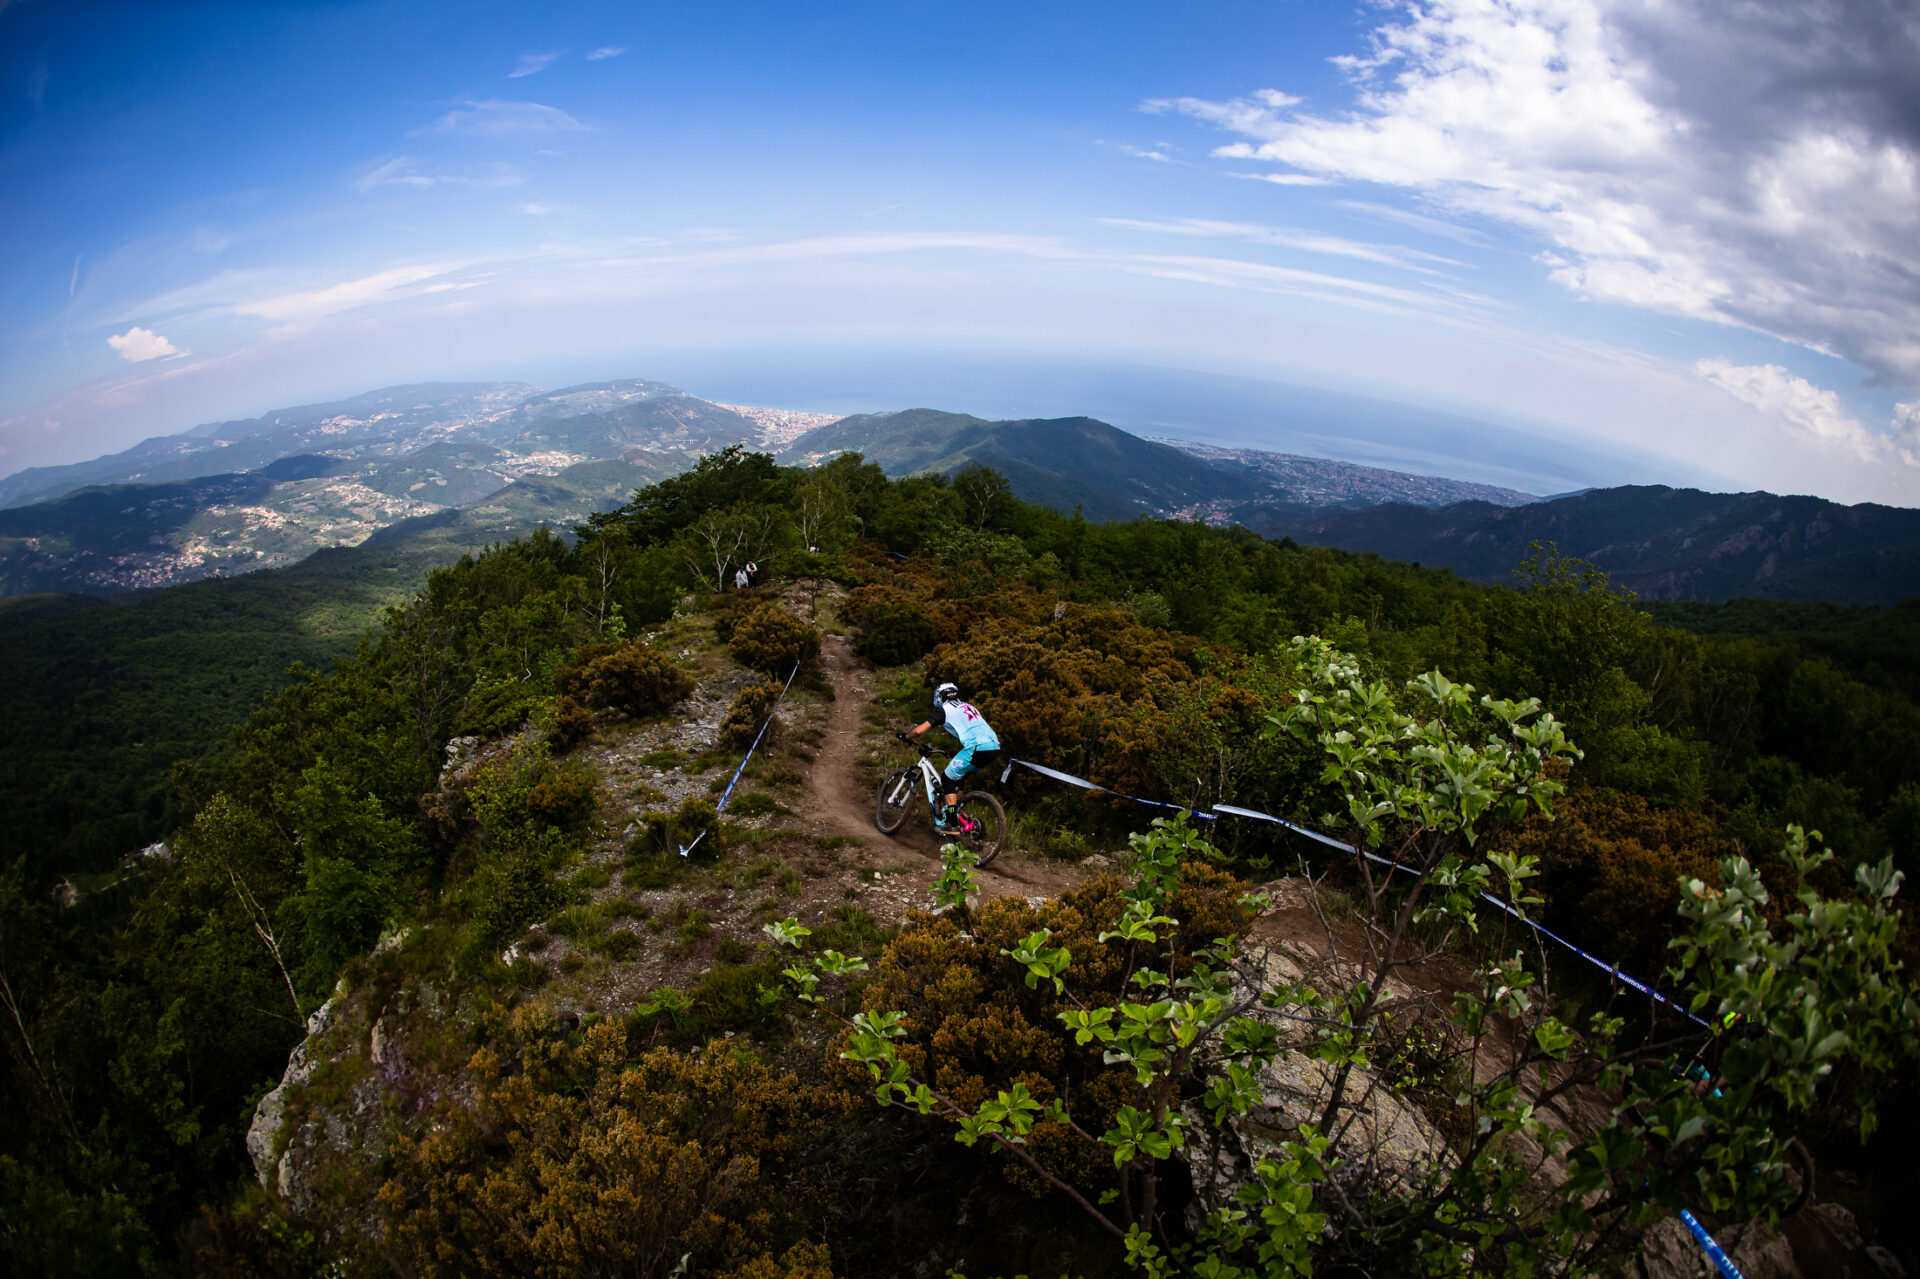 Rider cruising down Italy trails with a view